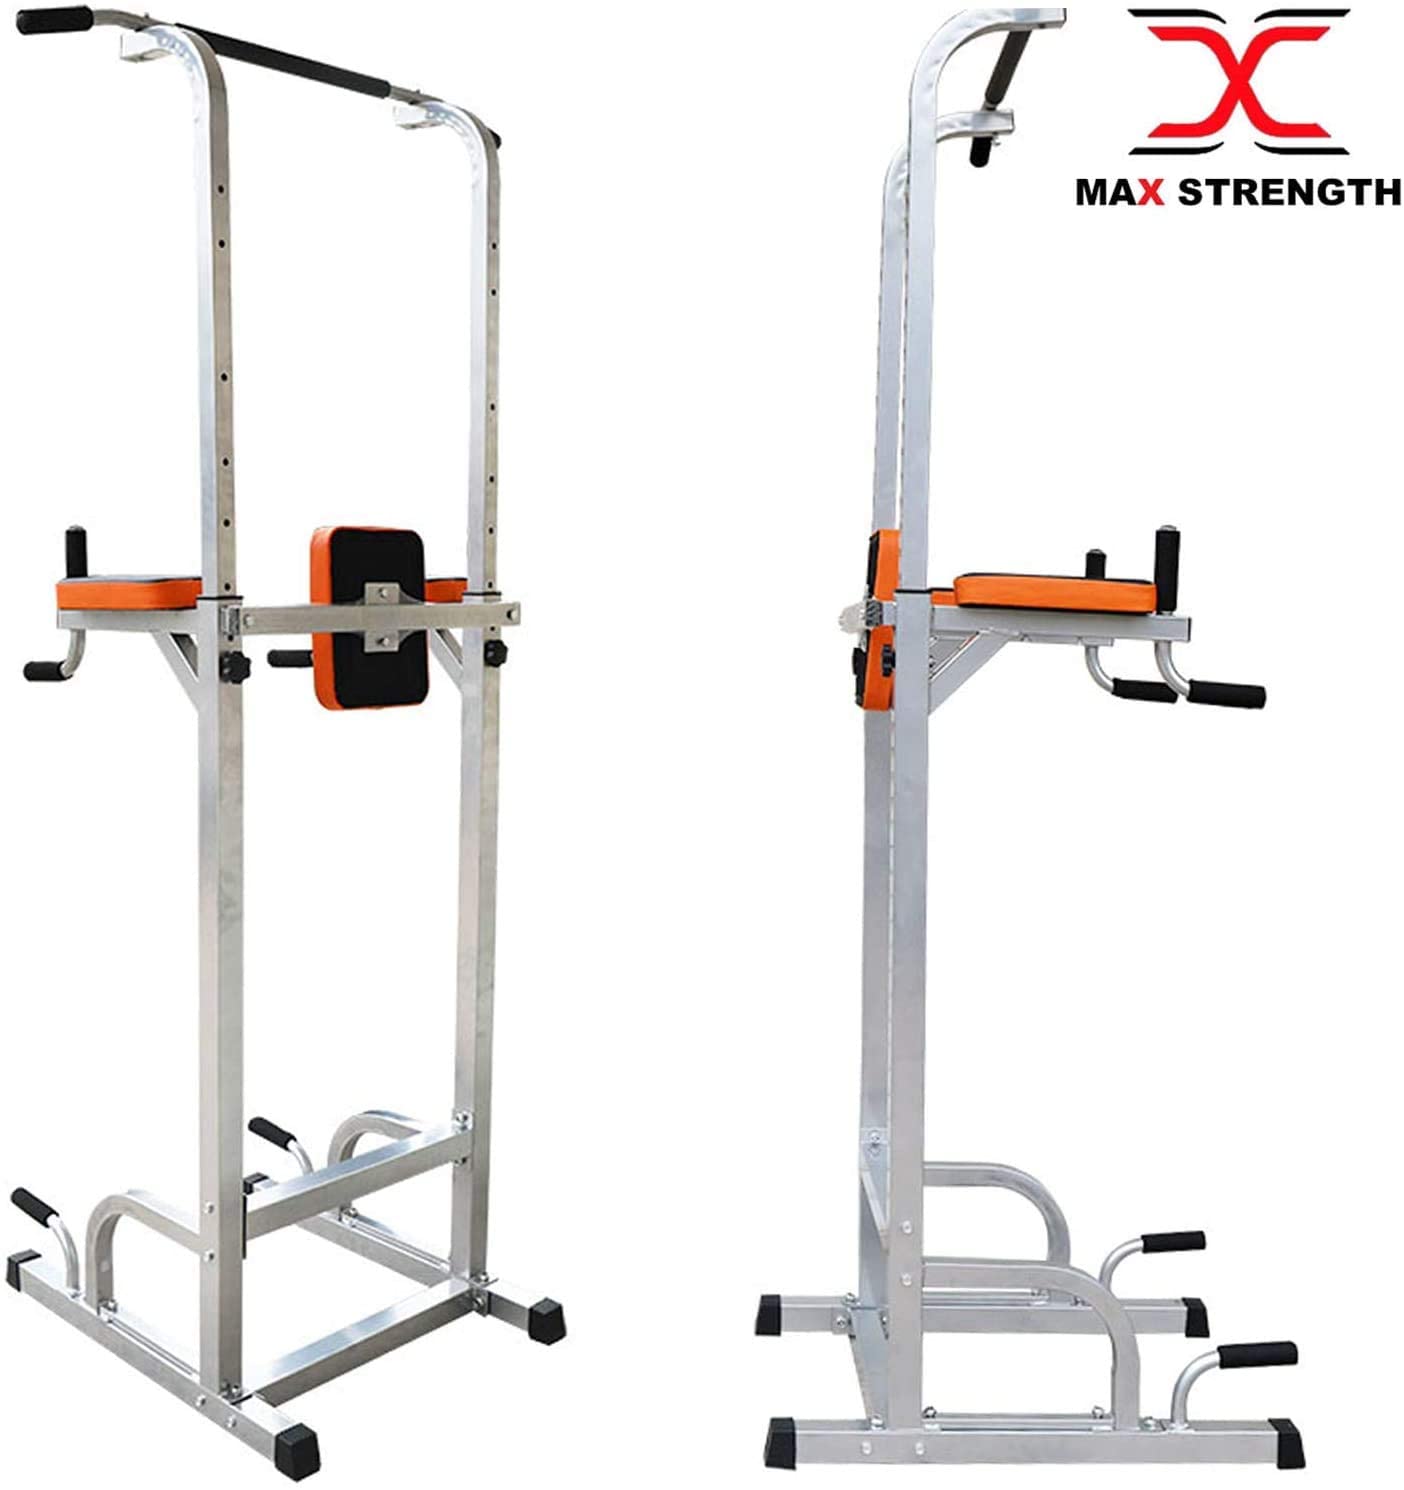 Max Strength Power Tower - Pull Up Rack & Dip Station for Home & Commercial use